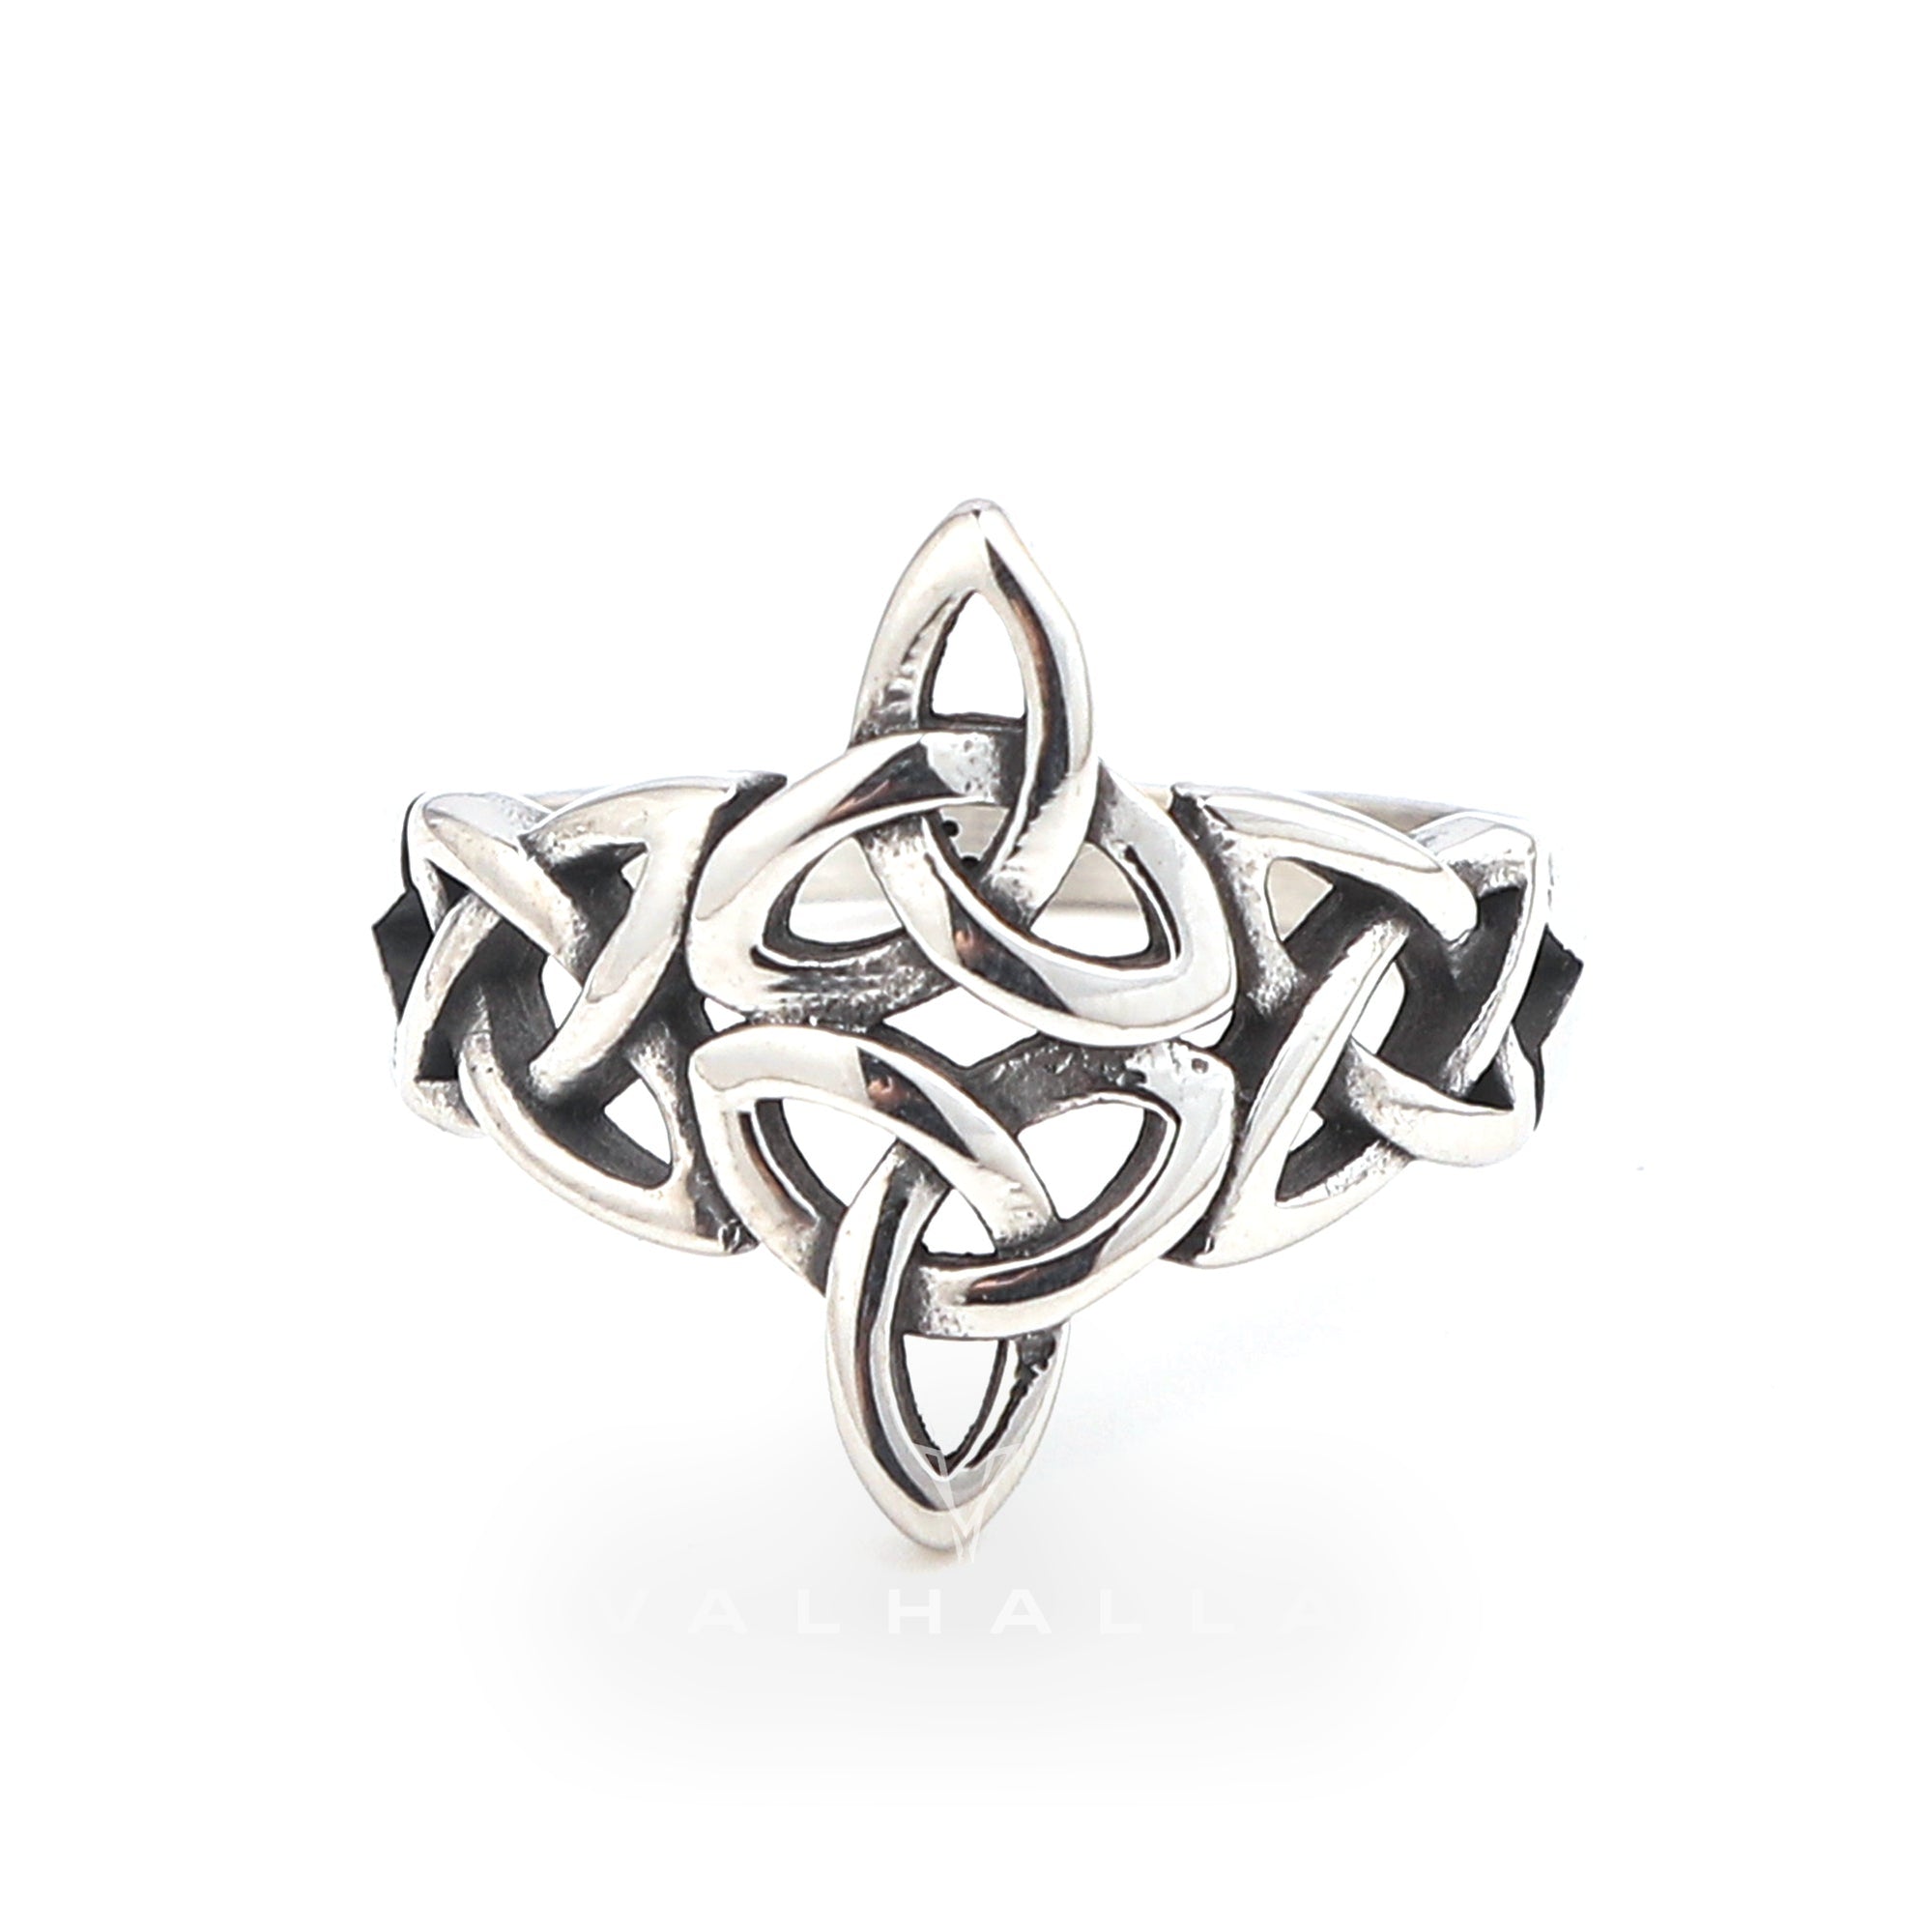 Handcrafted Stainless Steel Triquetra and Celtic Knot Ring